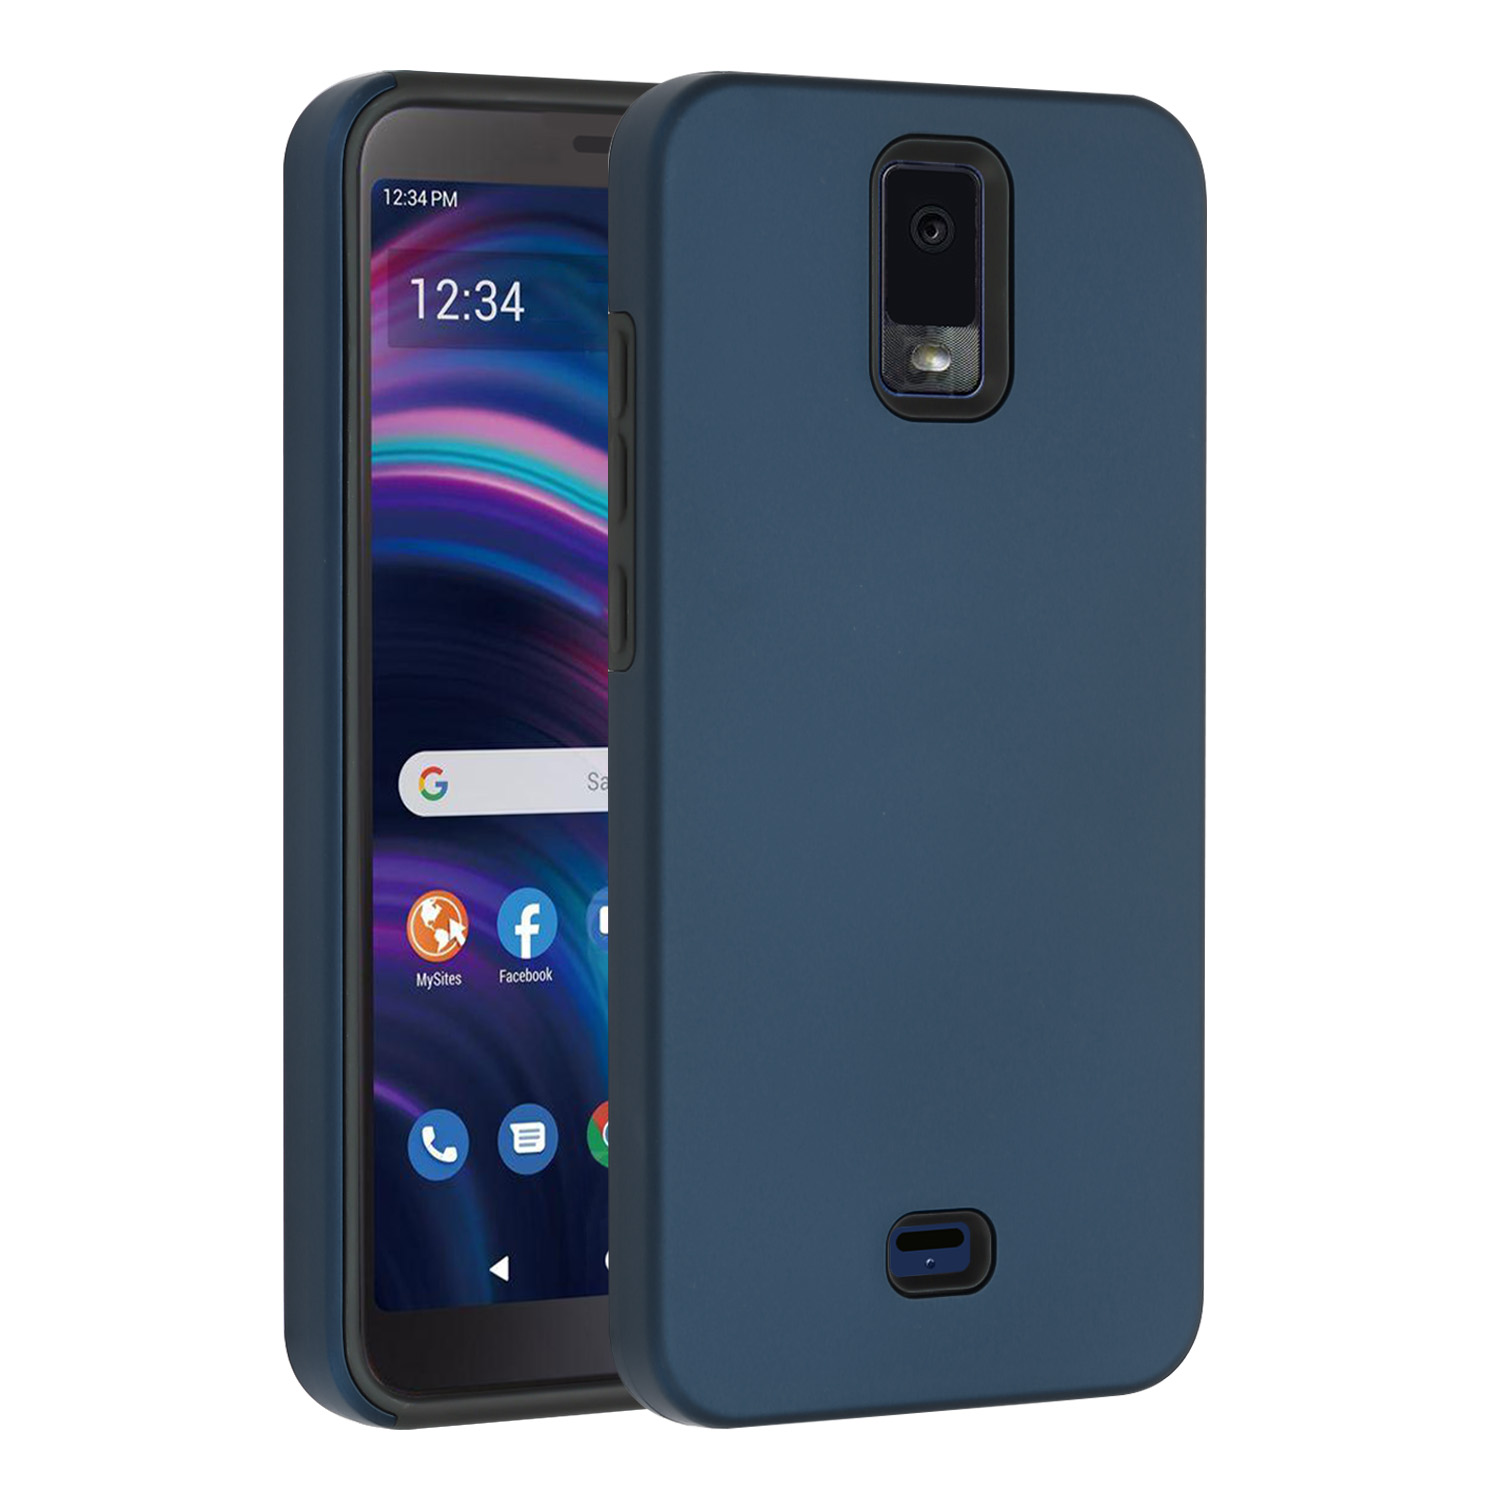 Glossy Dual Layer Armor Defender Hybrid Case Cover for BLU View 3 (Navy Blue)